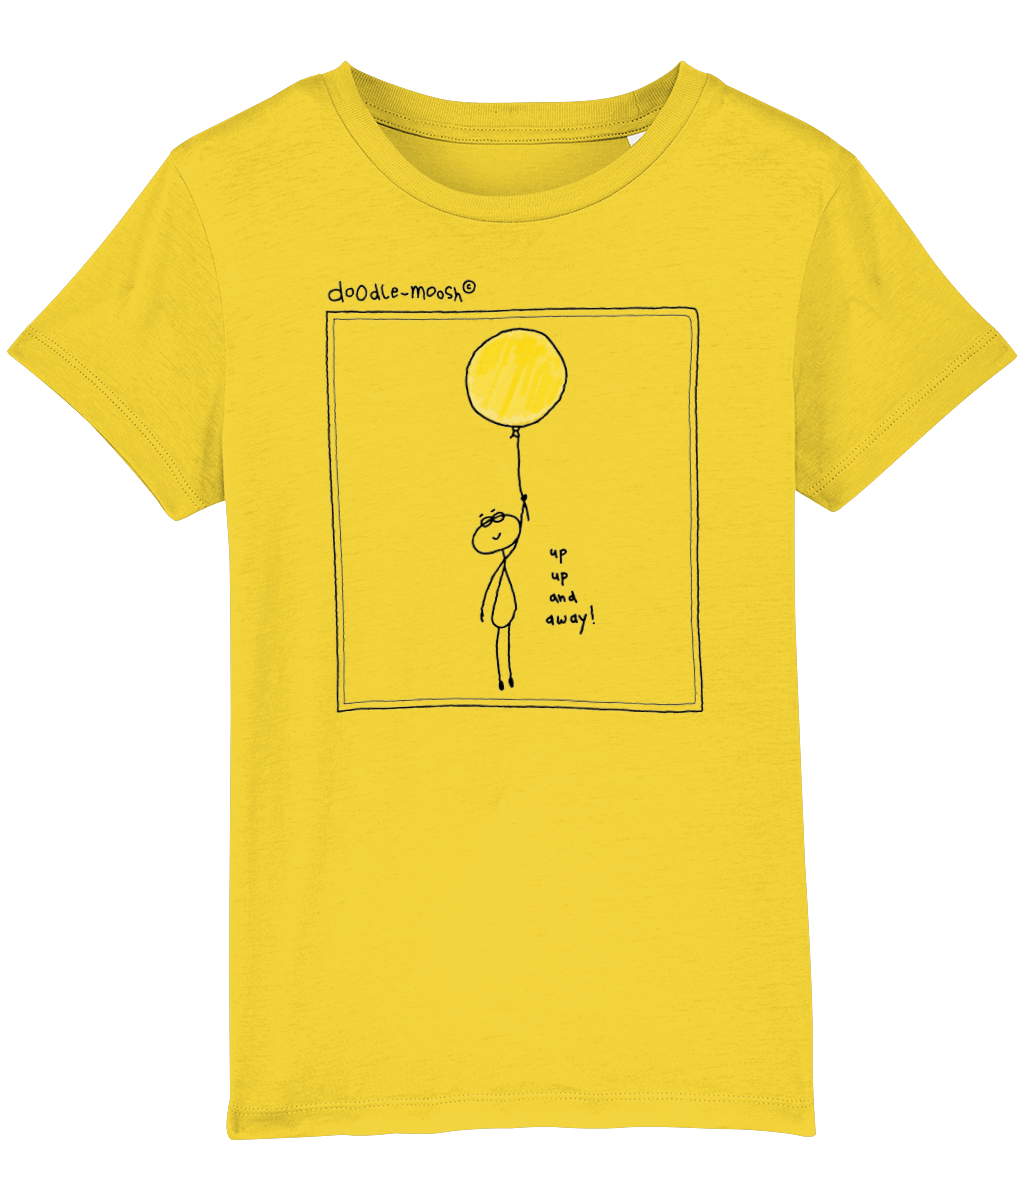 Up up and away t-shirt, yellow with black, colourful drawing